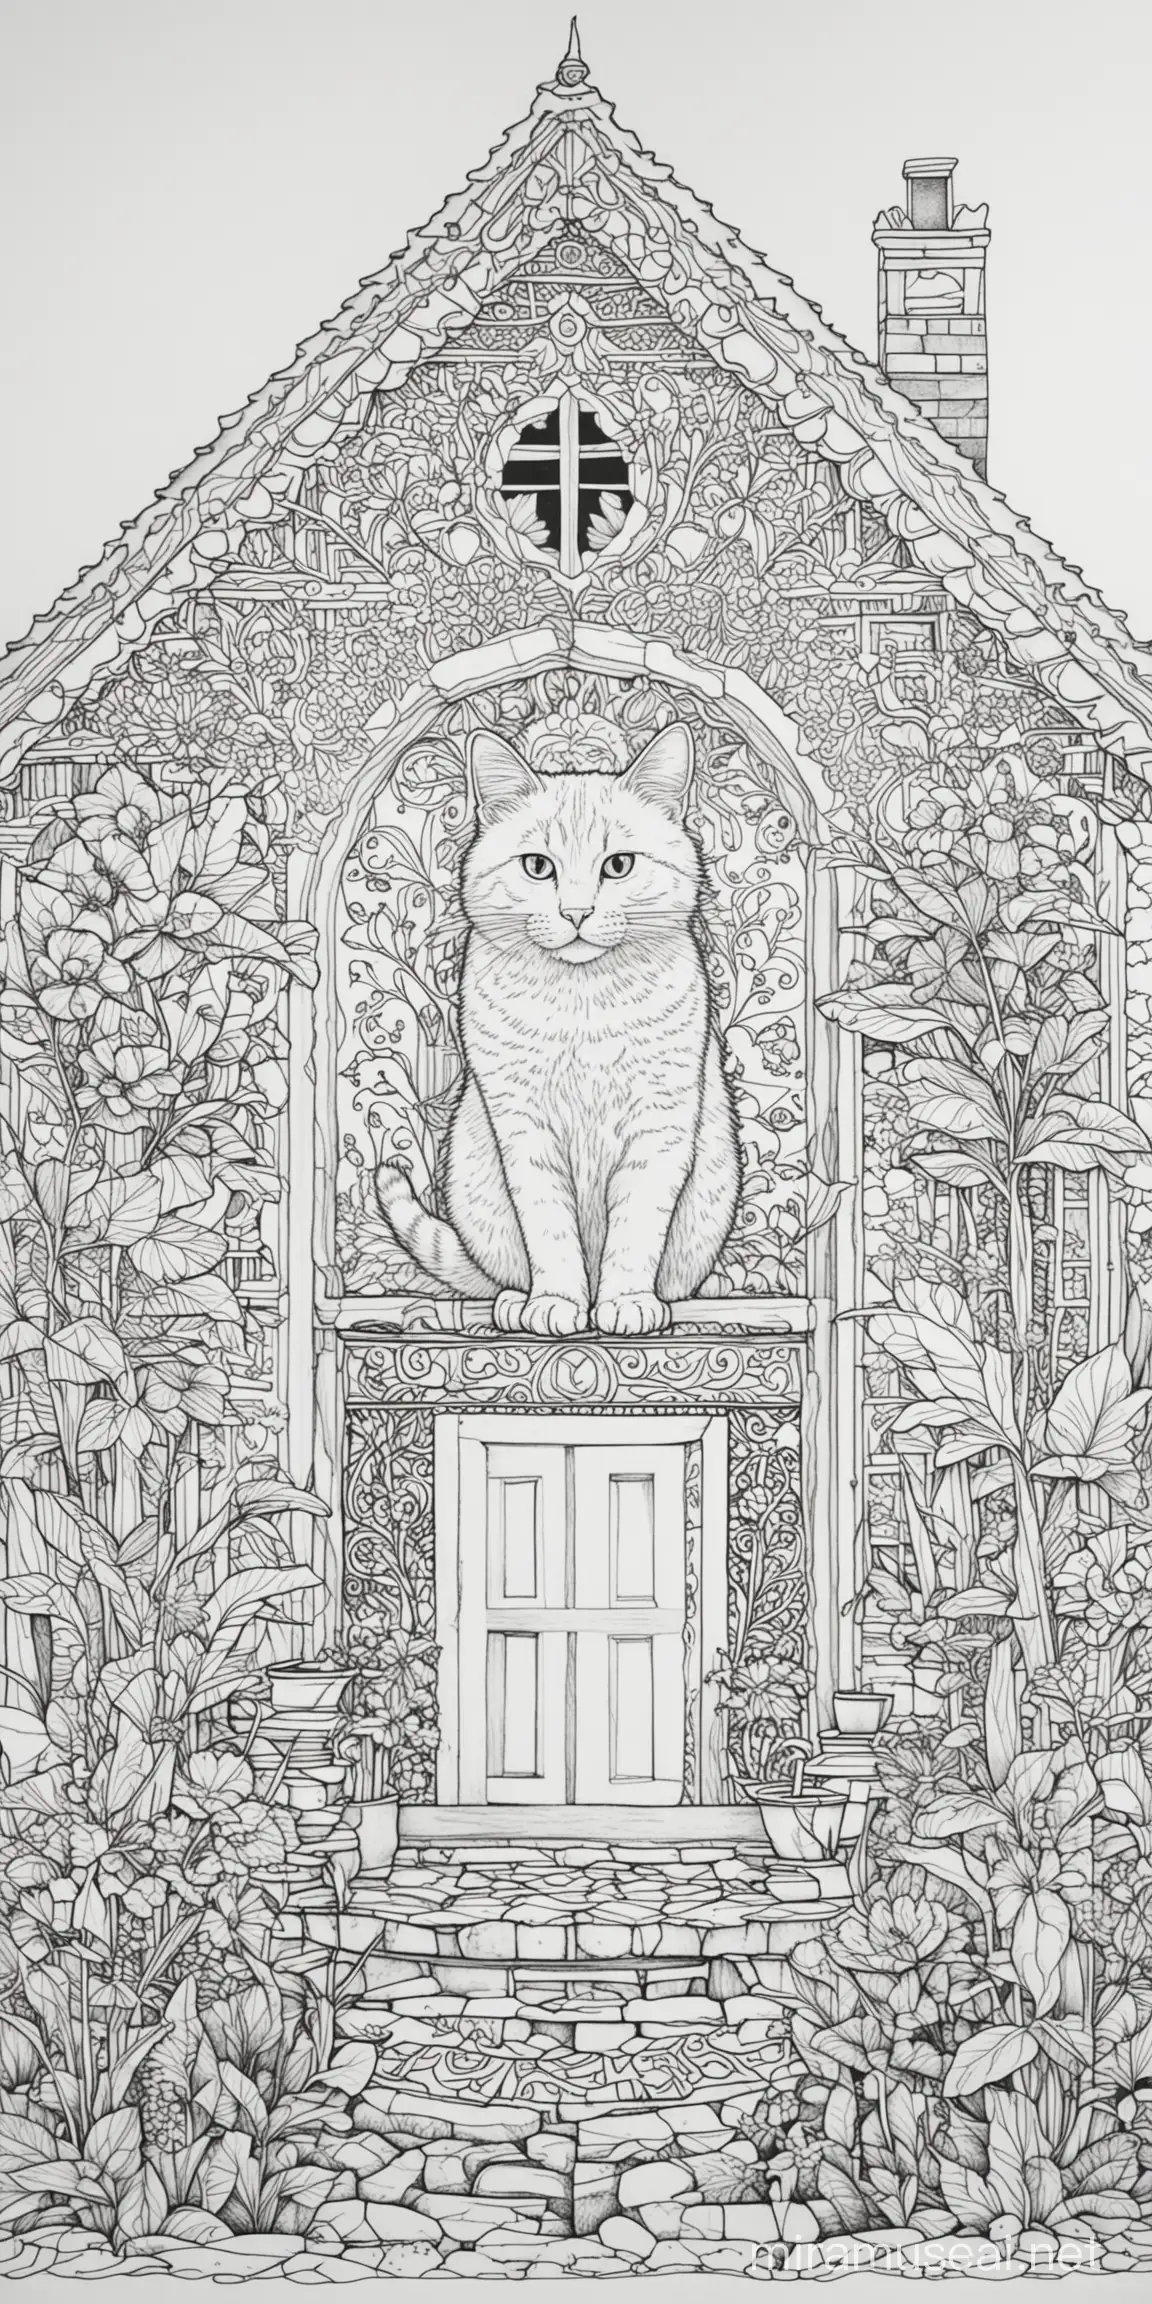 coloring page for adults, madala, one cat image, white background, clean line art, old house, ar 2:3